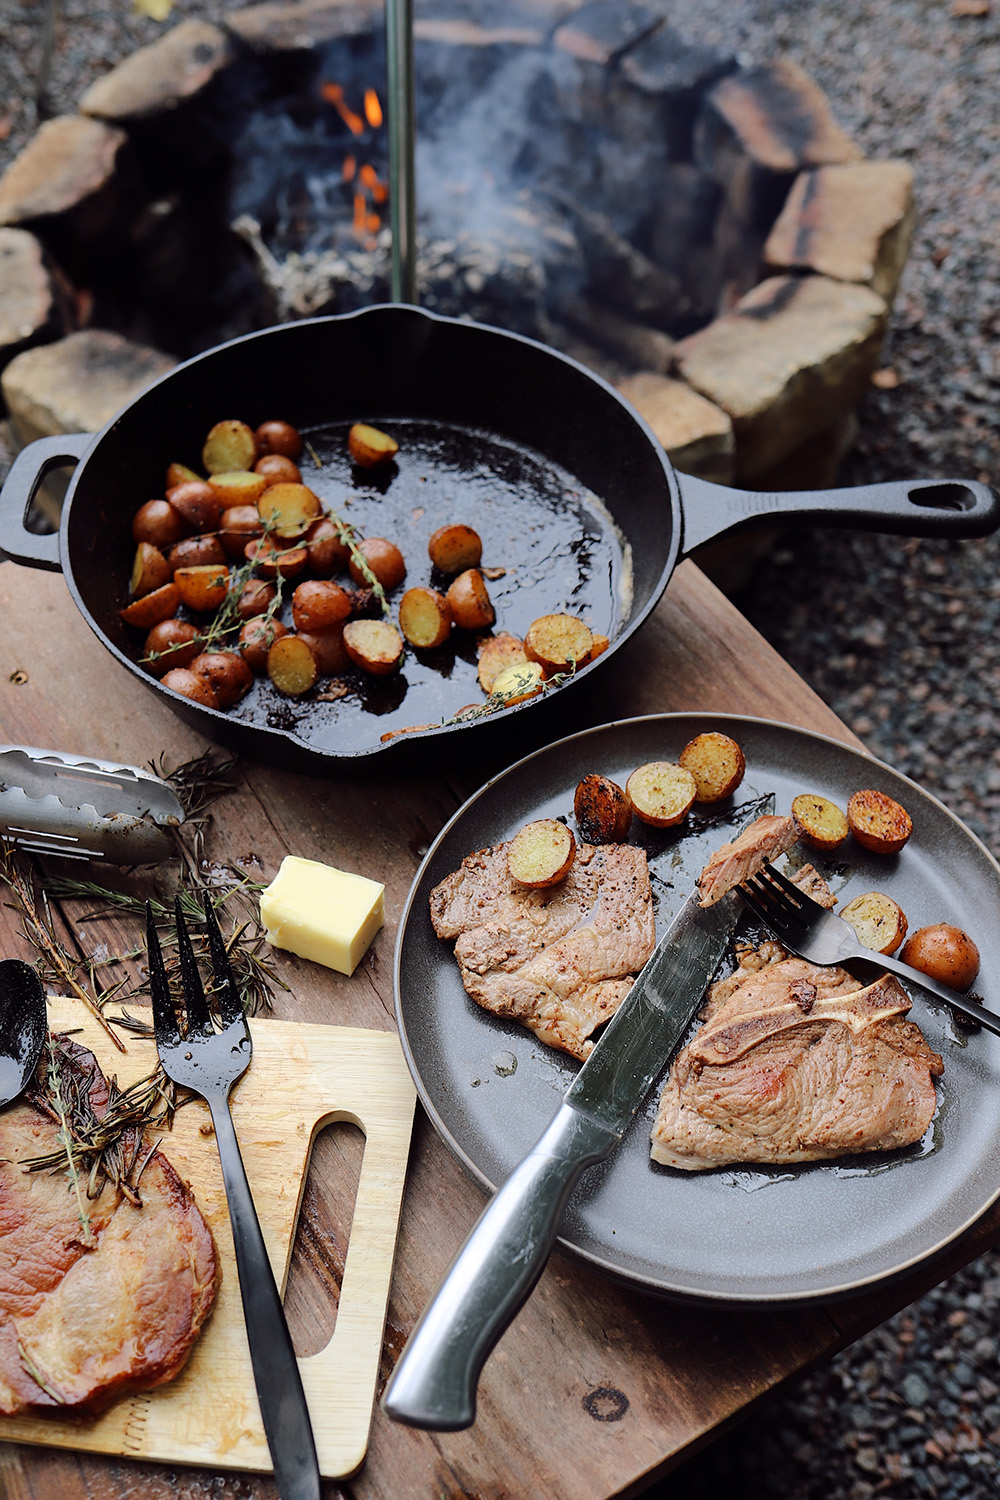 Cabin cooking with 5 delicious cast iron recipes to try on your next cabin trip! Feature by US lifestyle blogger Tabitha Blue of Fresh Mommy Blog. Delicious Cast Iron Pork Steak Recipe